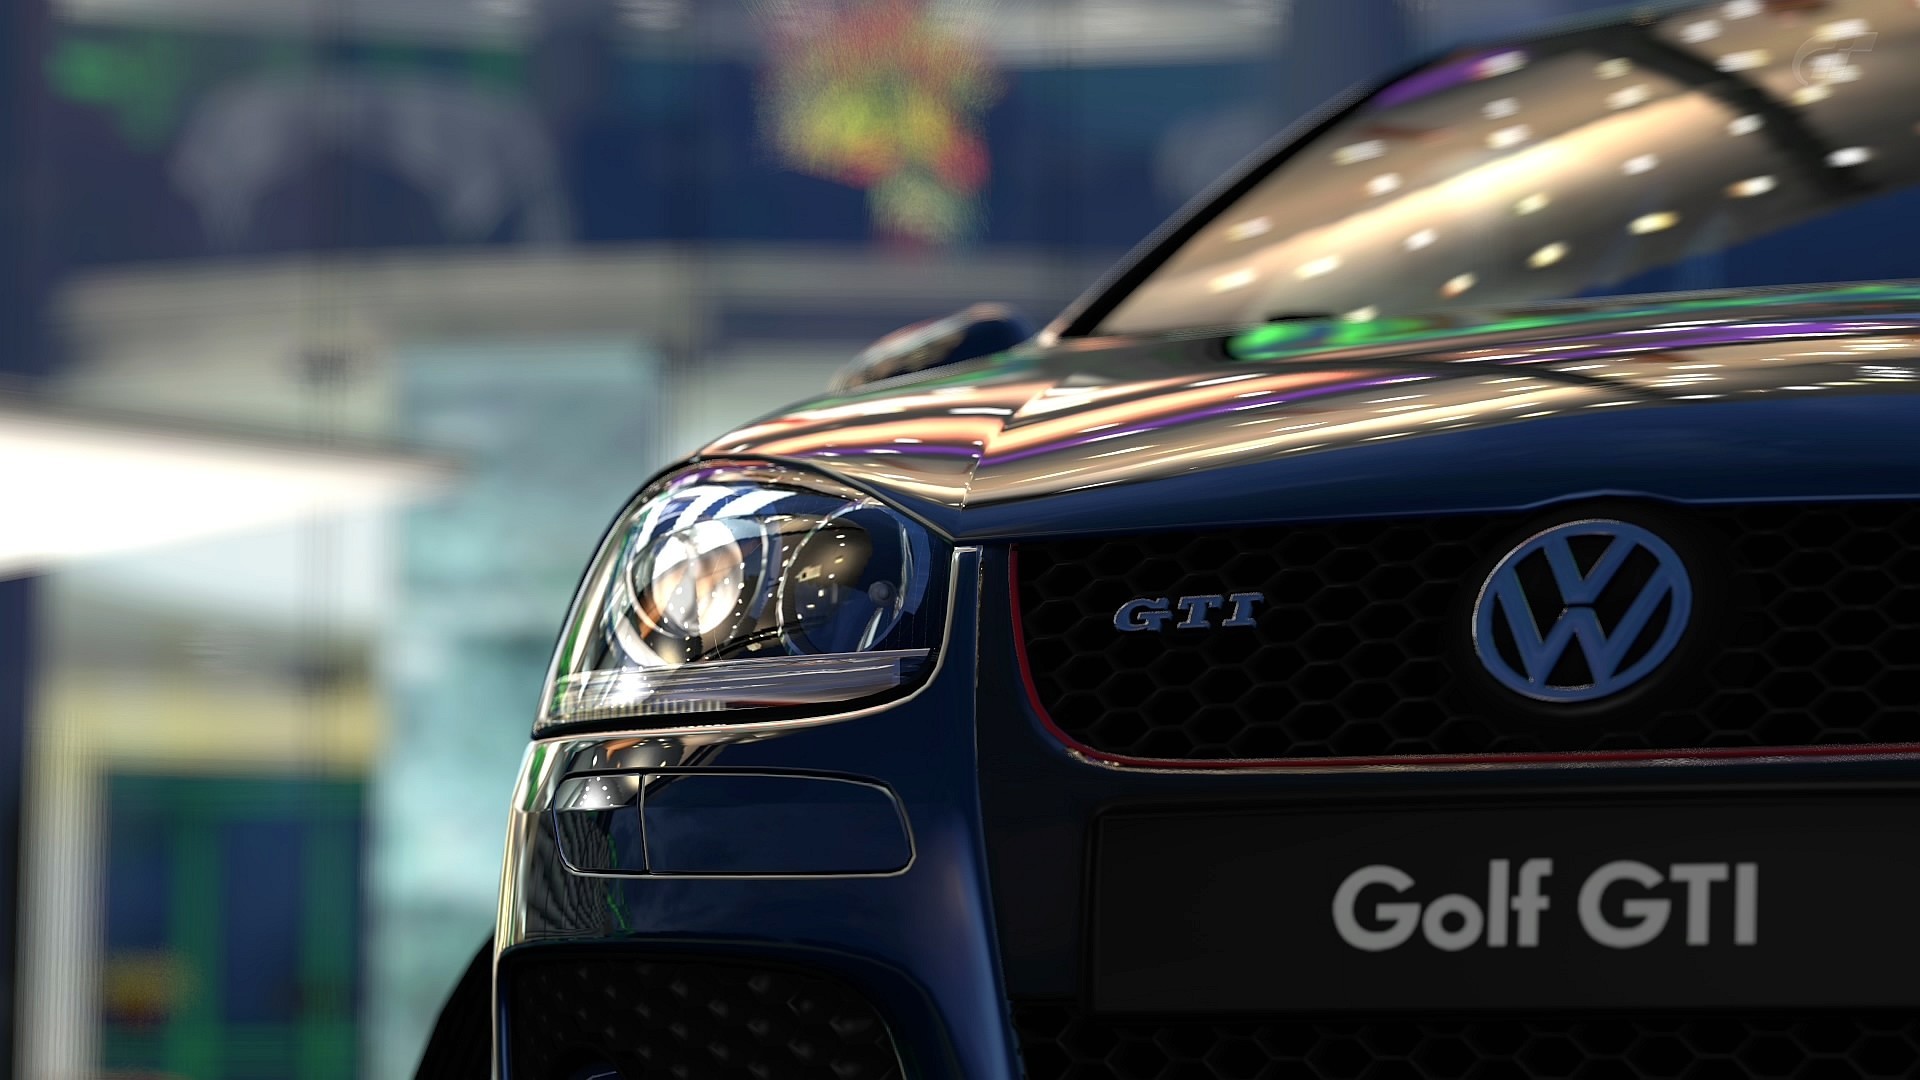 76 Golf Gti Wallpapers on WallpaperPlay